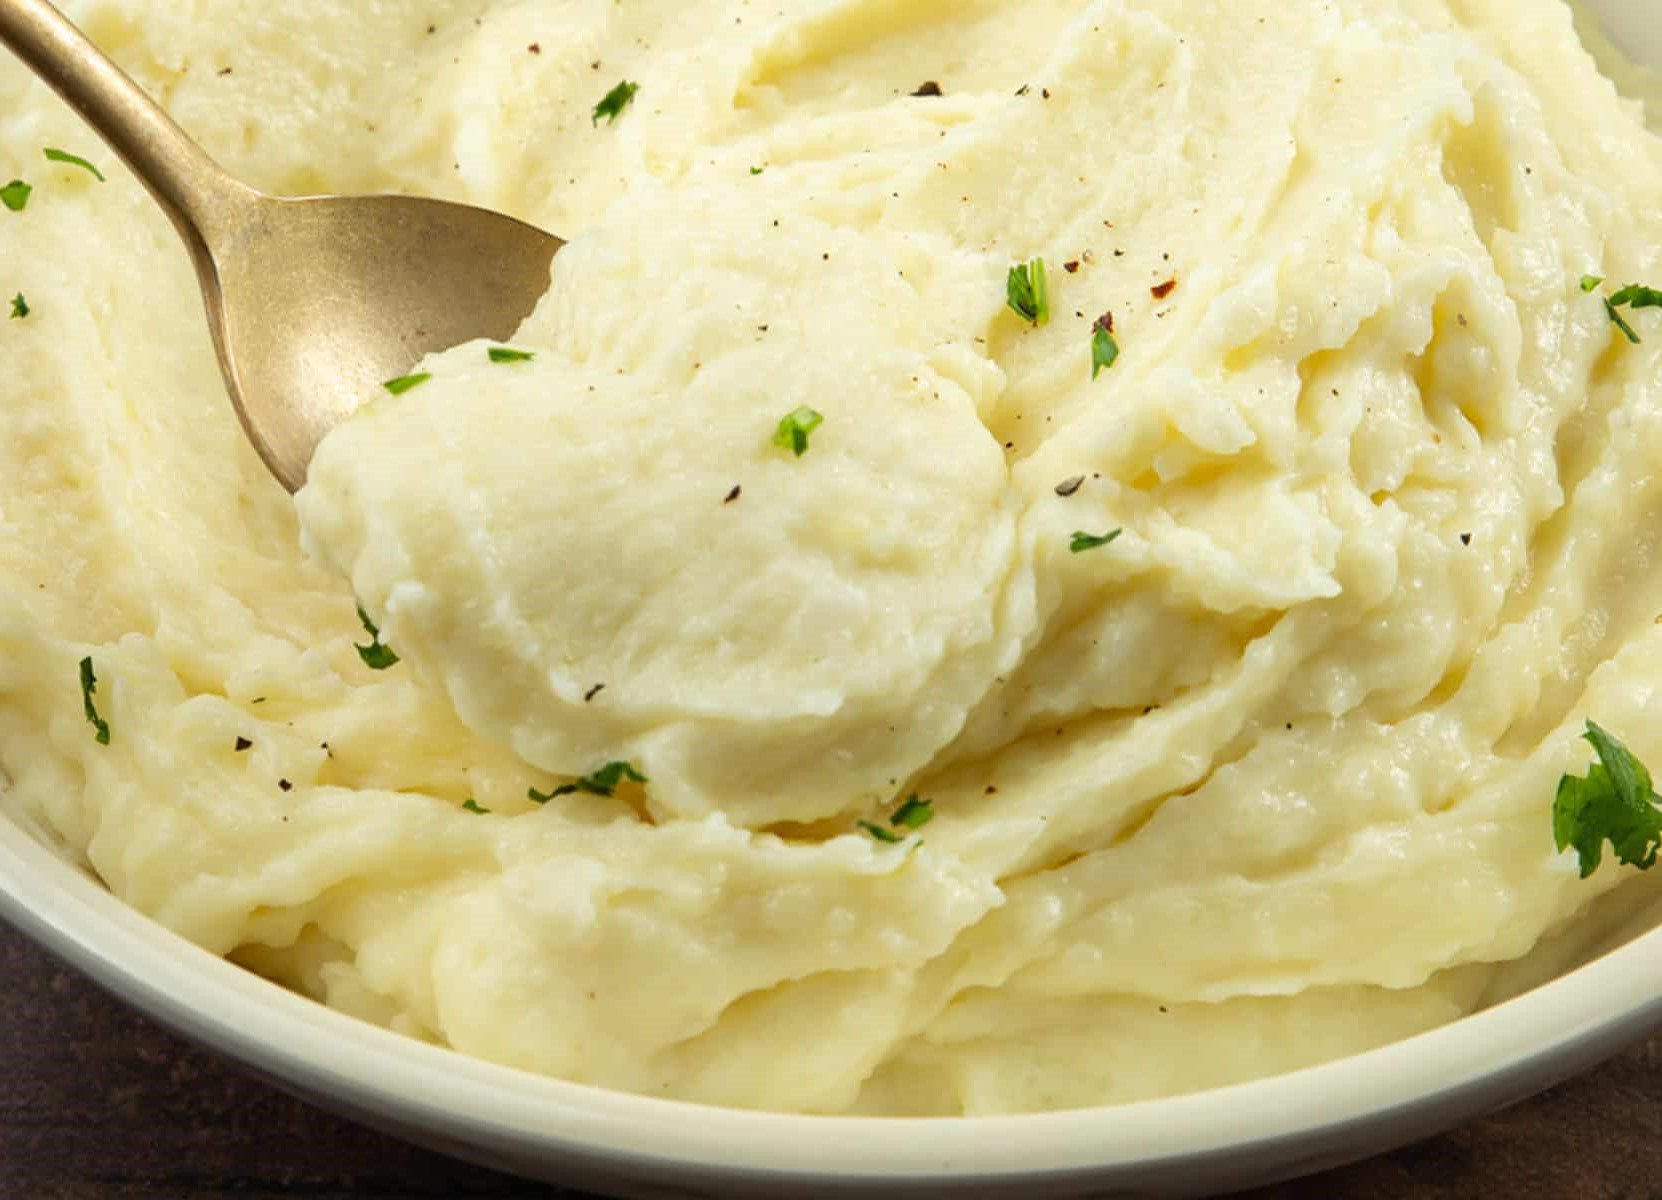 Instant Pot Mashed Potatoes Recipe Guide